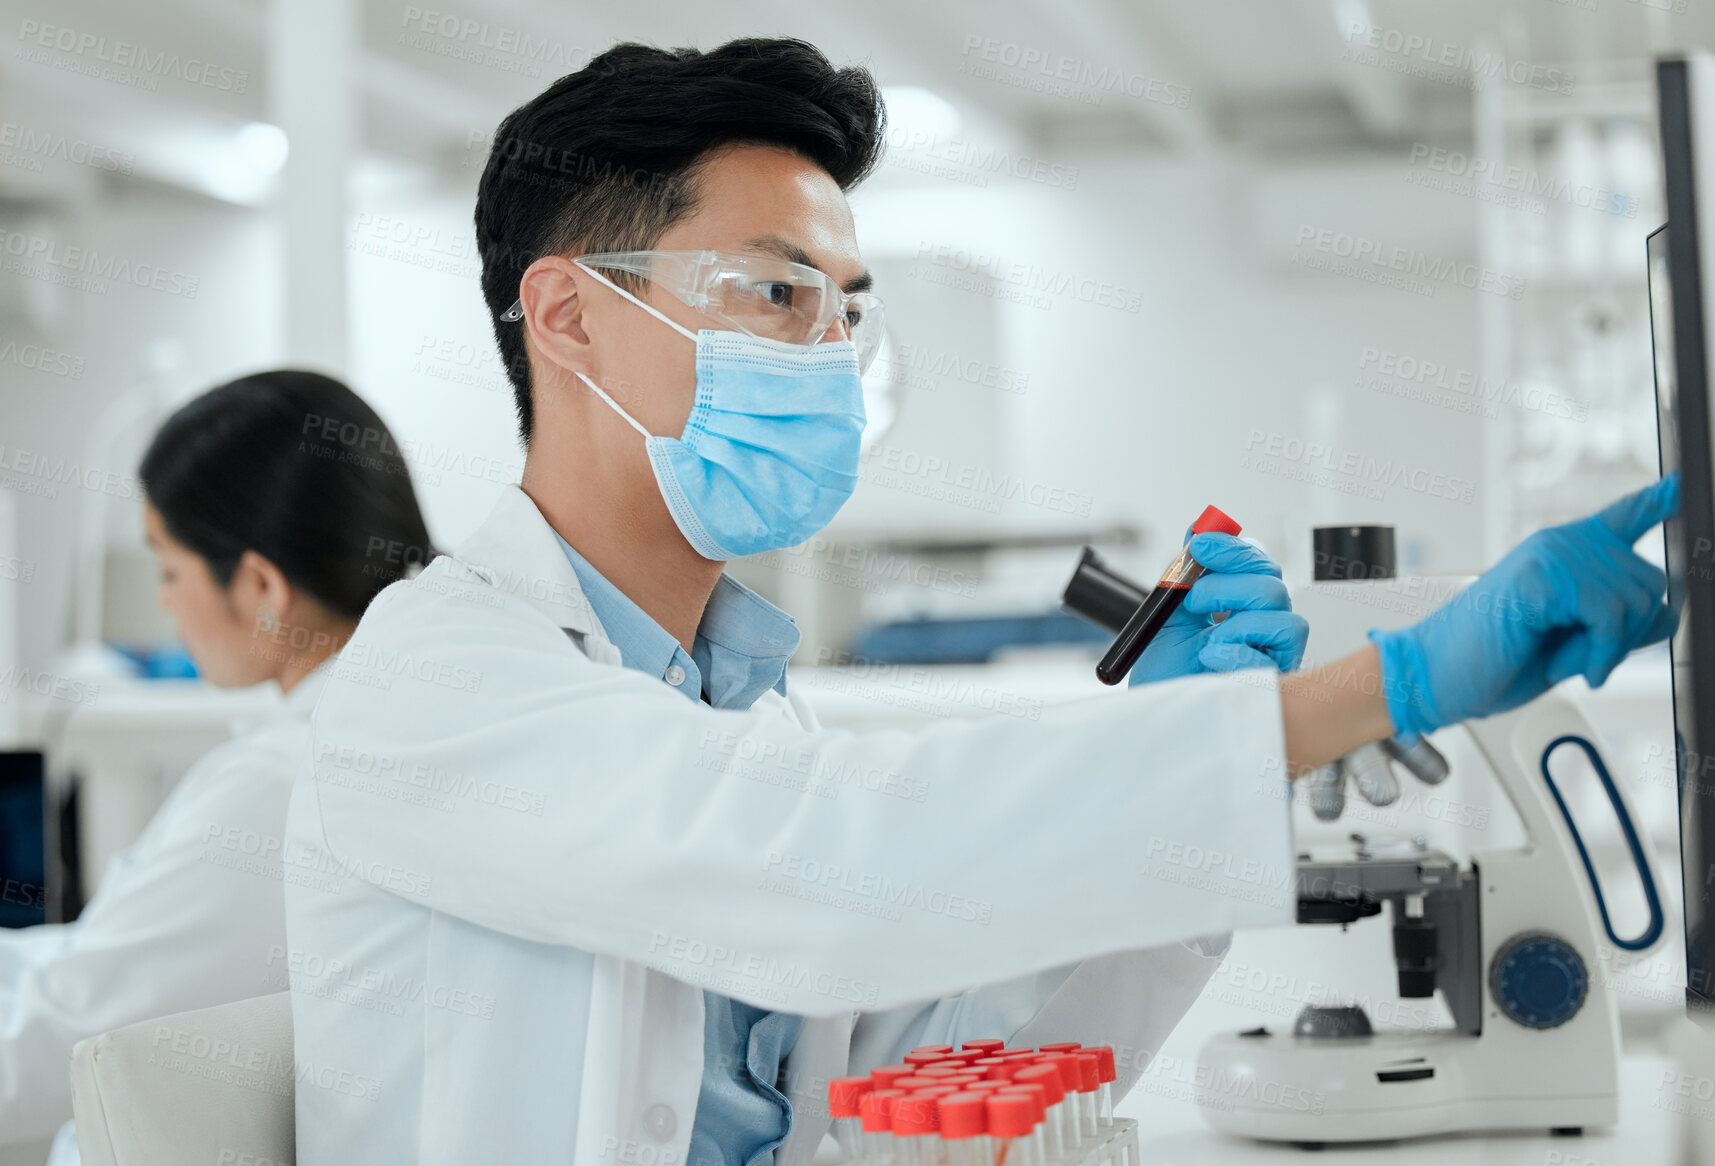 Buy stock photo Shot of a young male scientist working in a lab